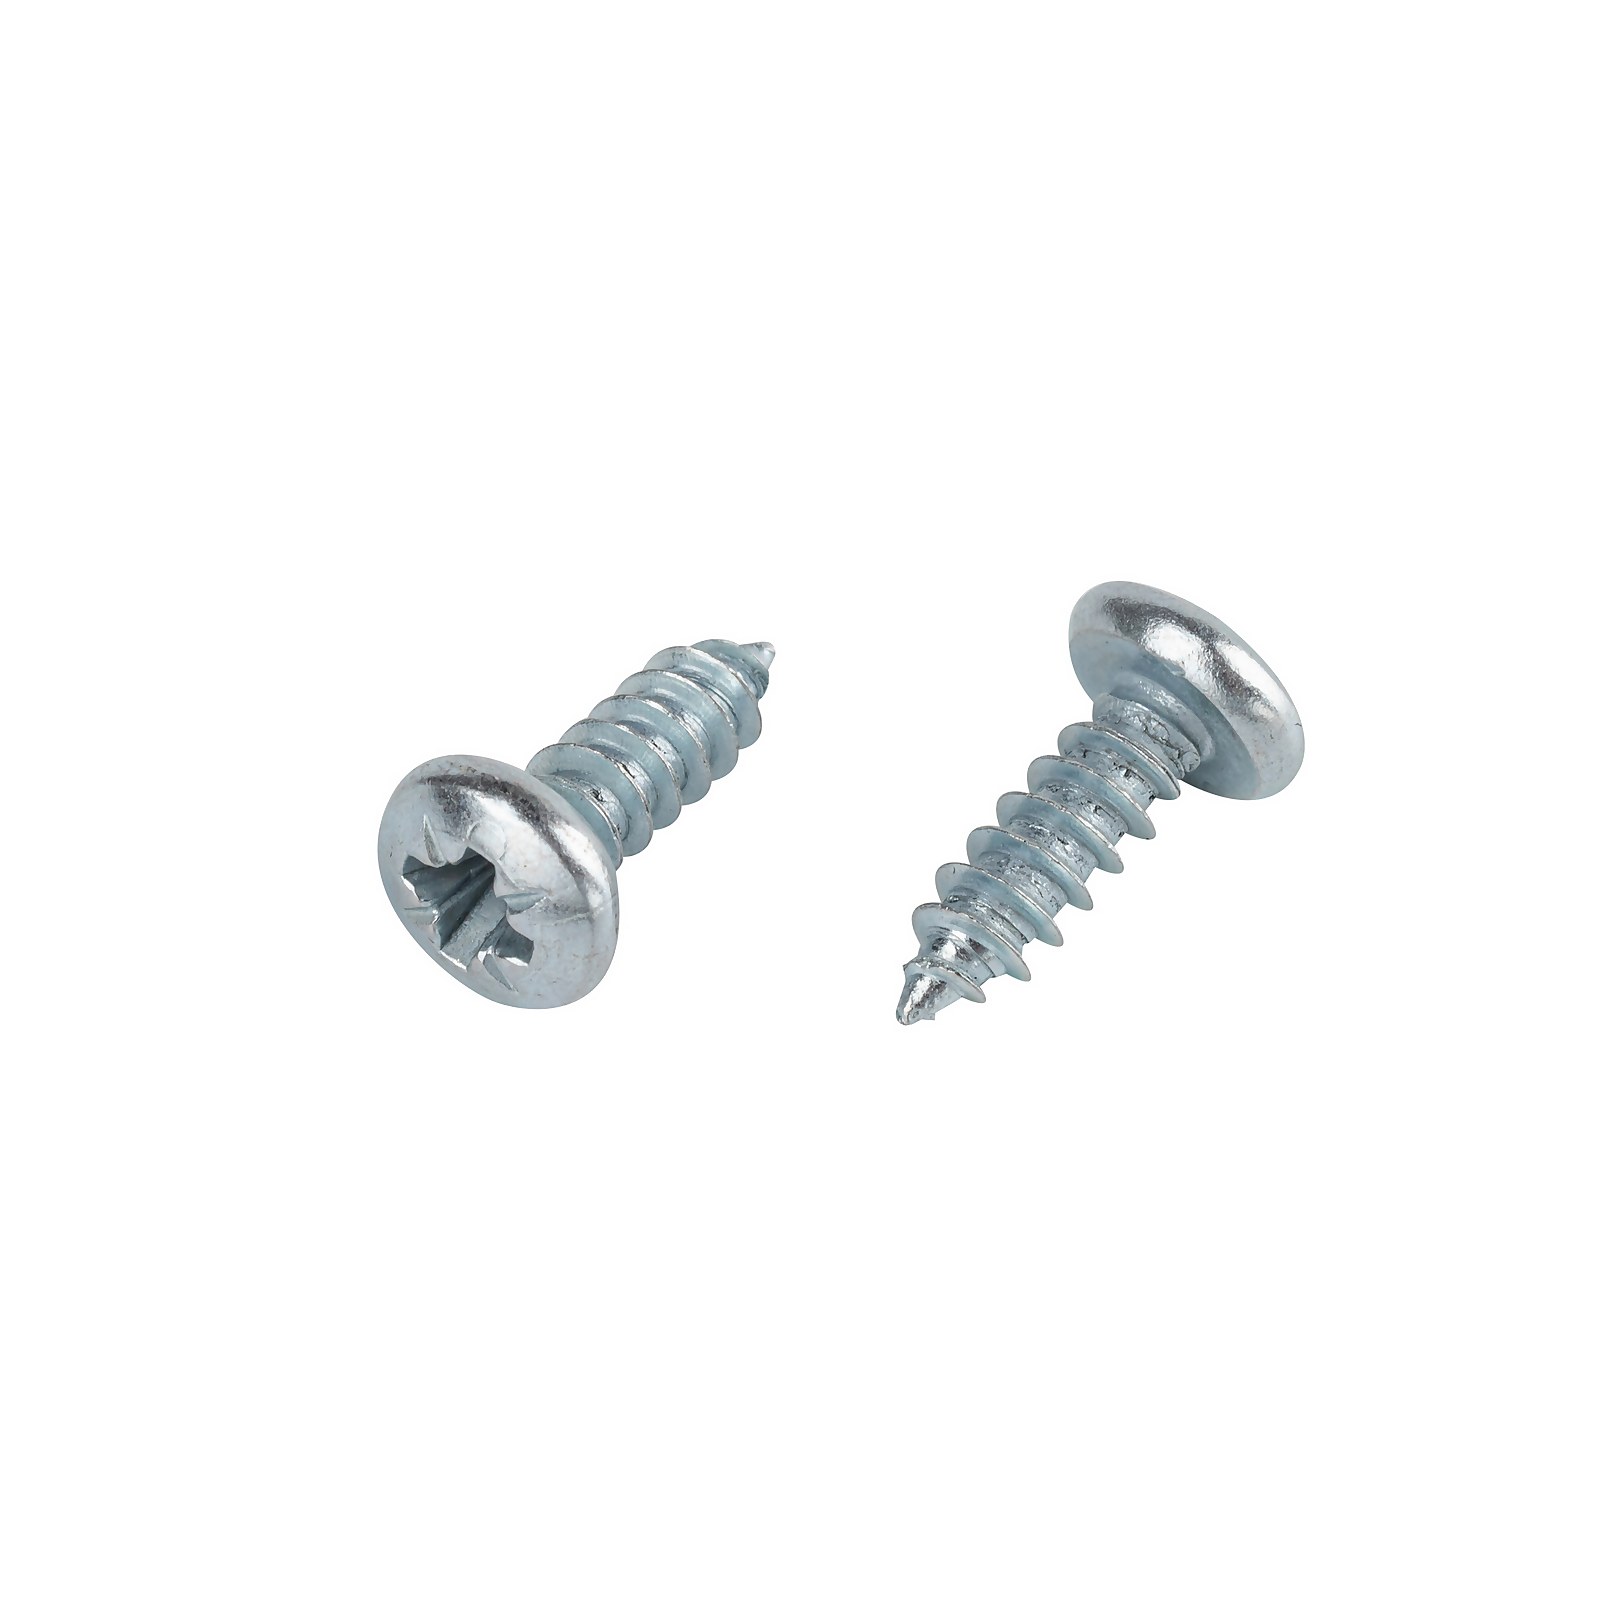 Photo of Homebase Zinc Plated Self Tapping Screw Pan Head 5 X 12mm 10 Pack